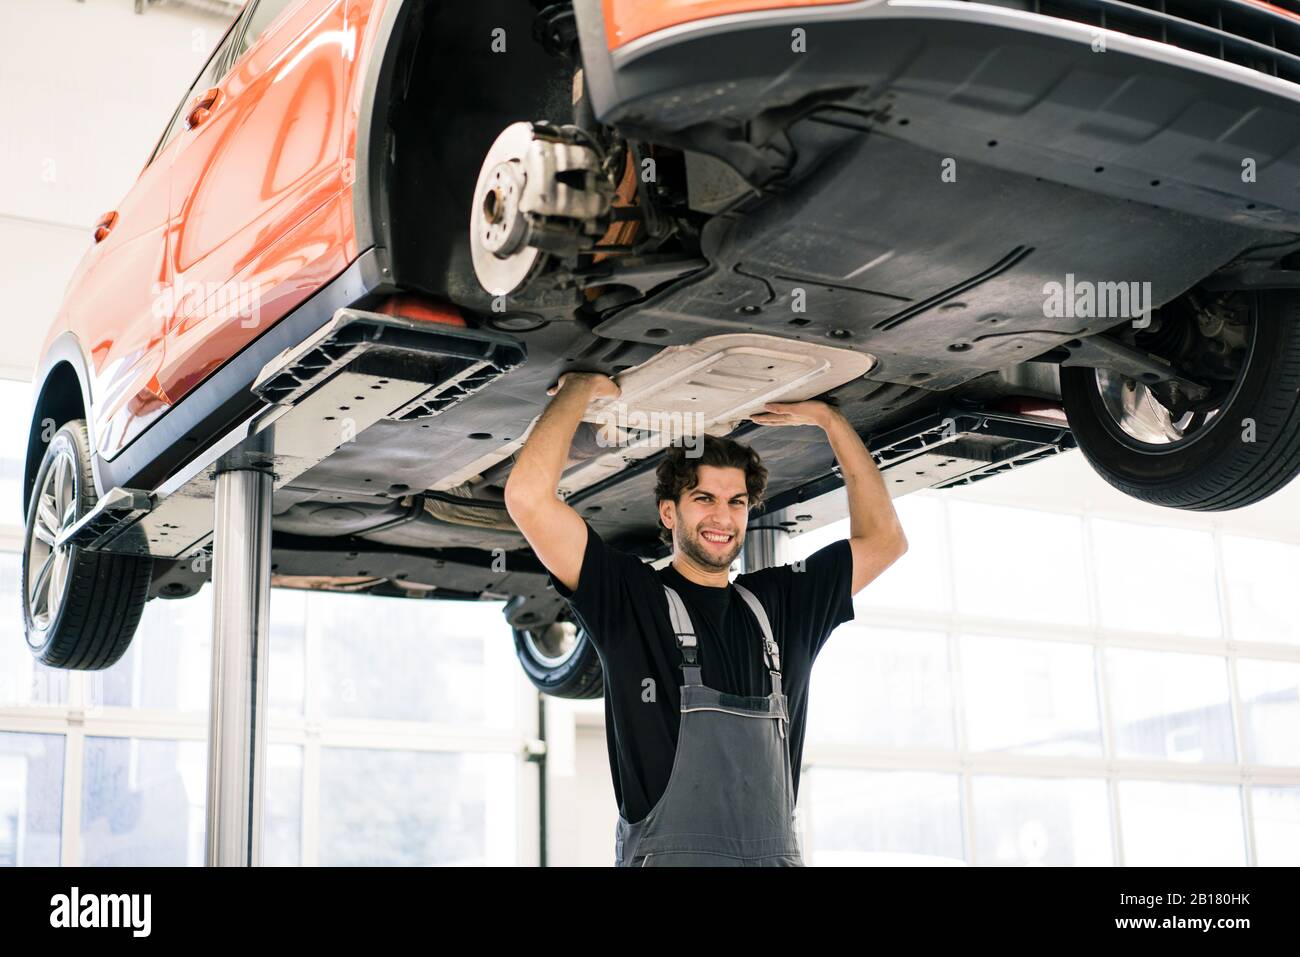 Portrait of a car mechanic in a workshop pretending to lift up a car Stock Photo